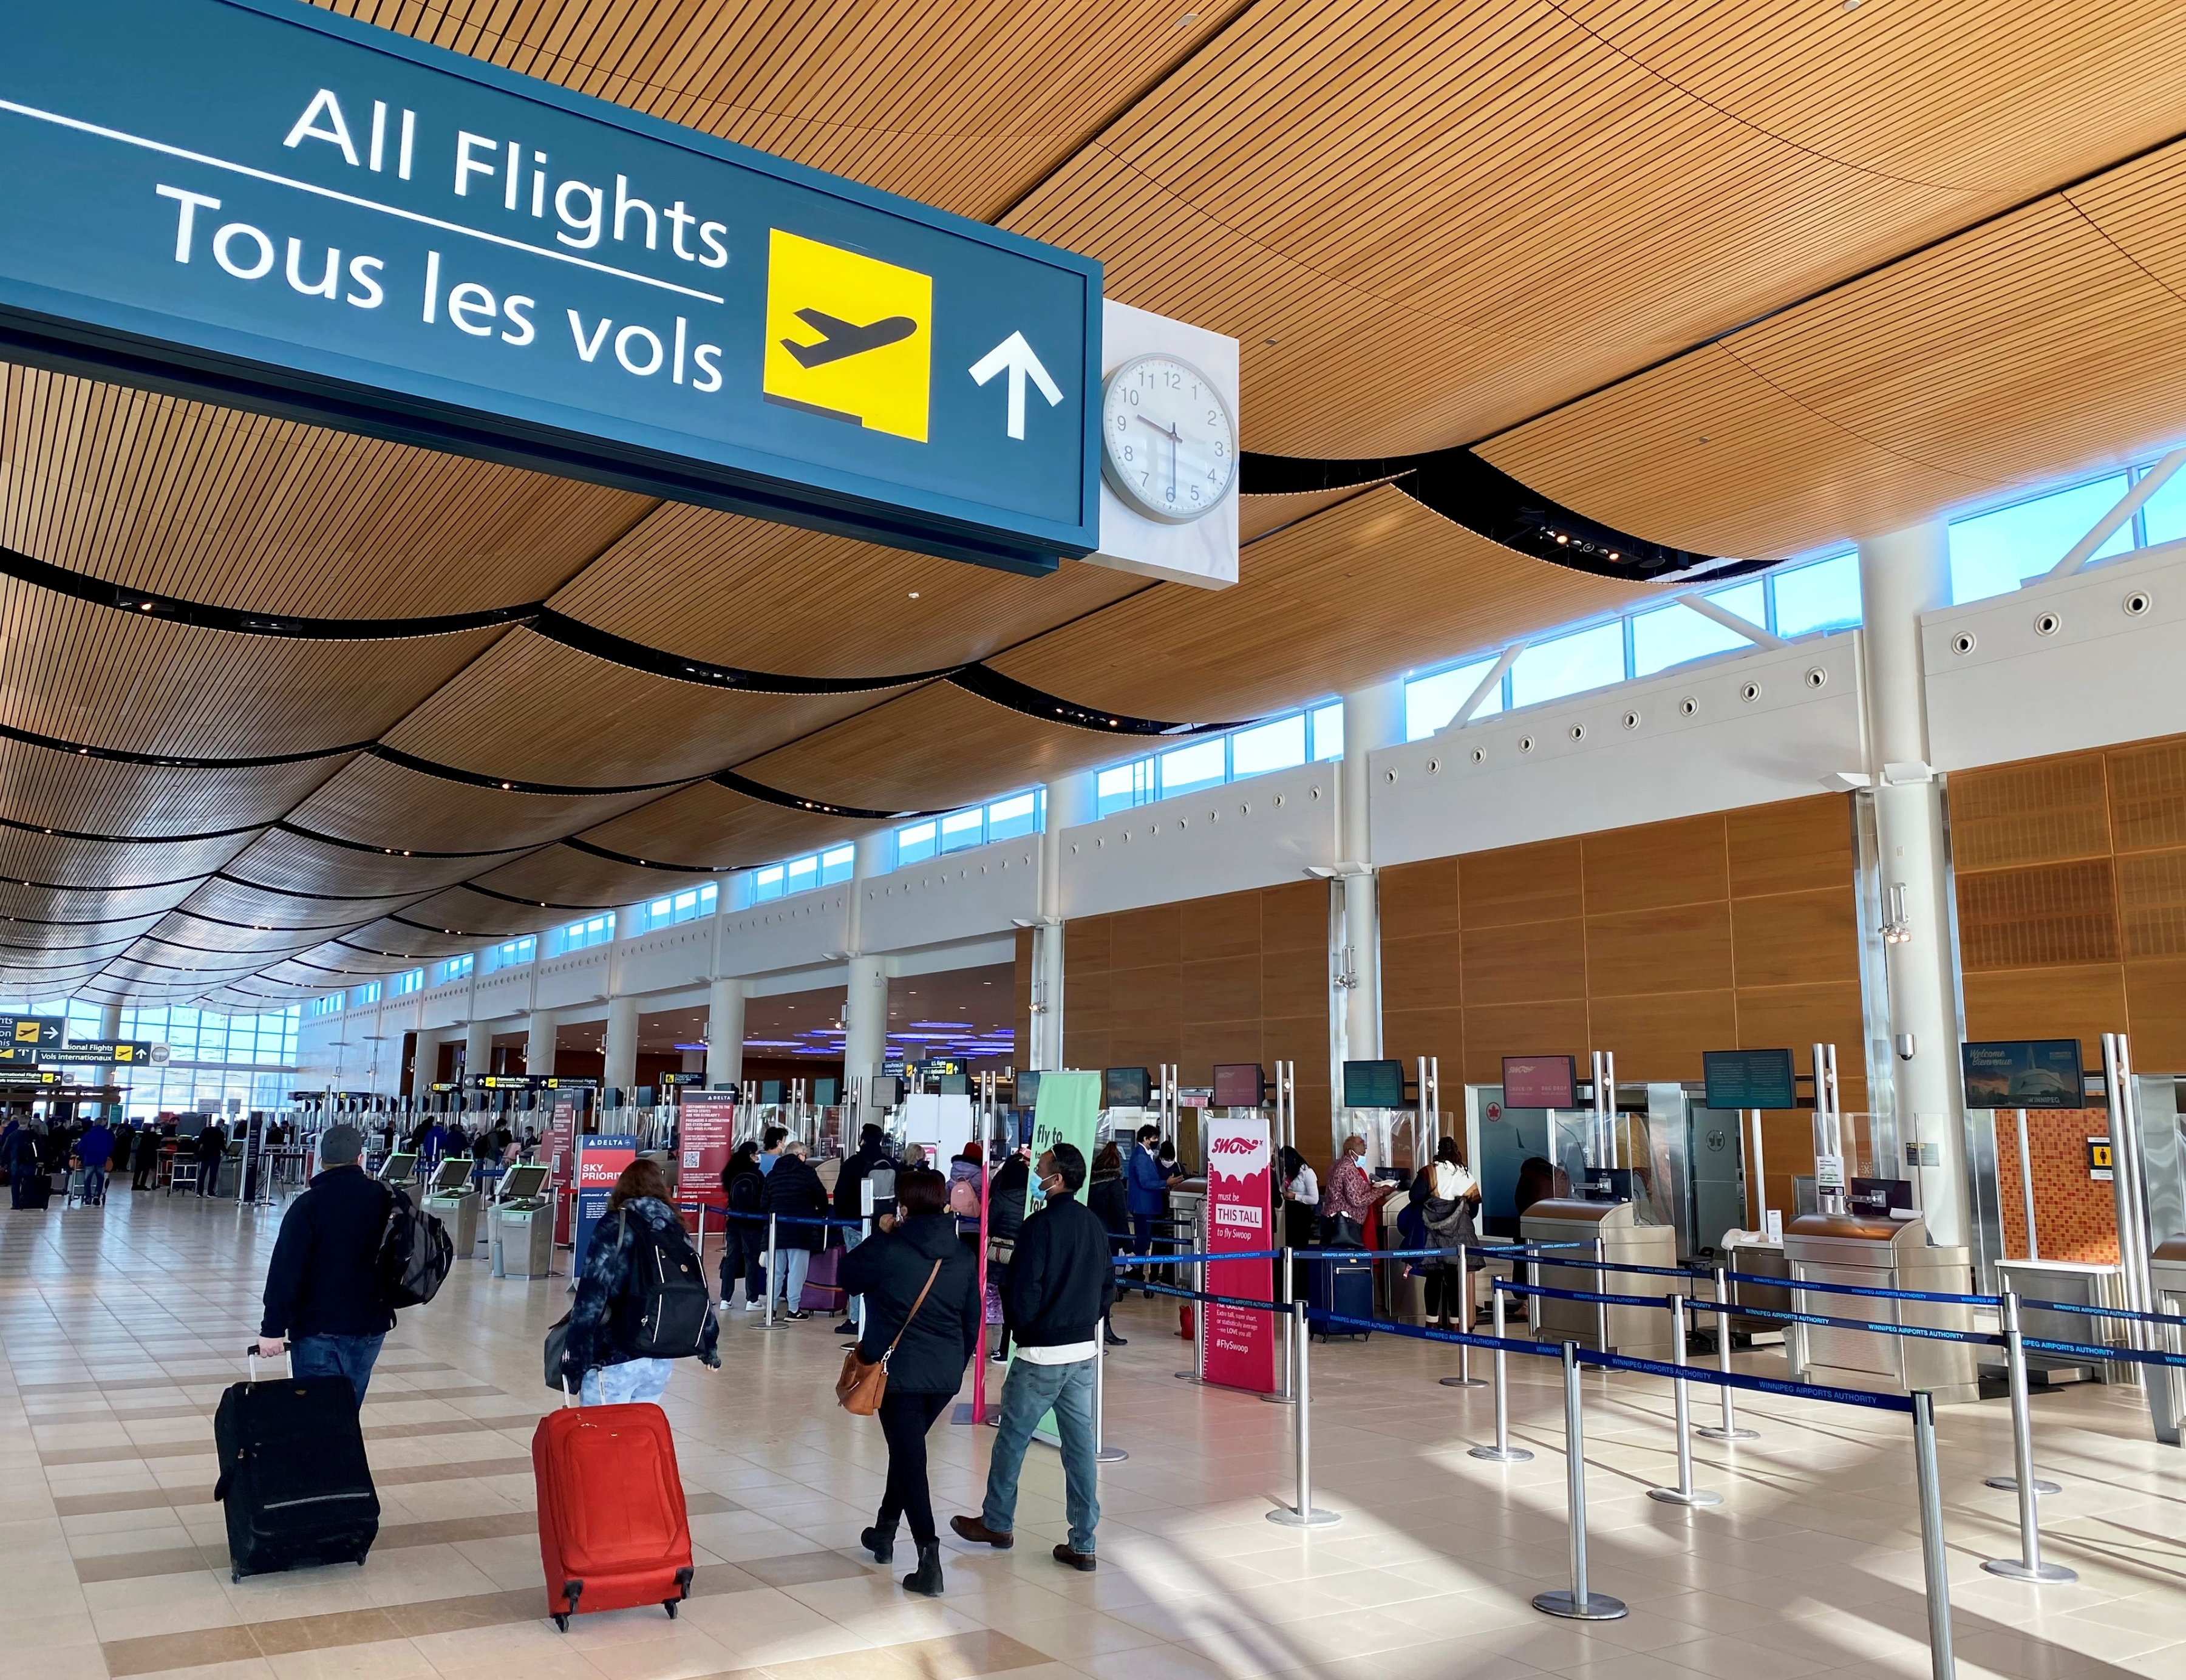 Travellers walk past a sign saying 'All Flights' on the Departures Level of the Winnipeg Richardson International Airport terminal.